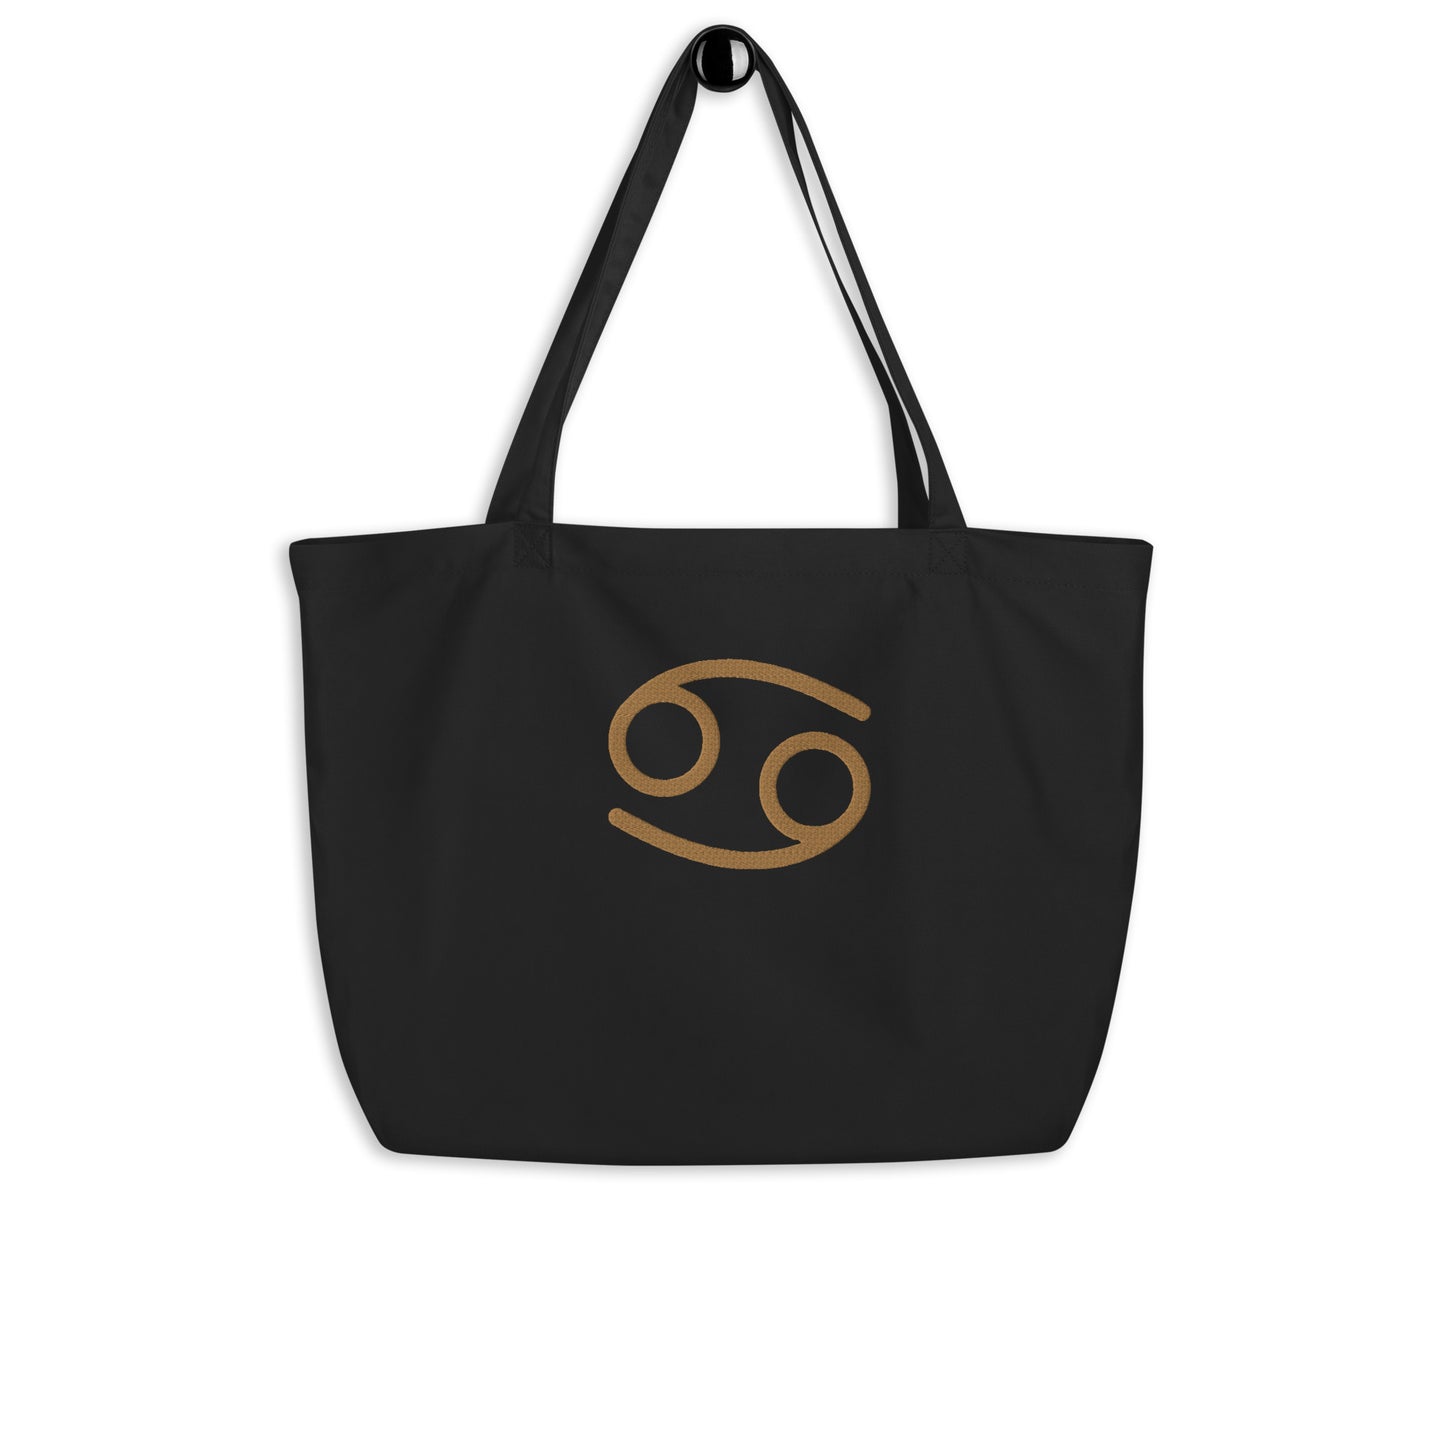 Cancer - Large Open Tote Bag - Gold Thread